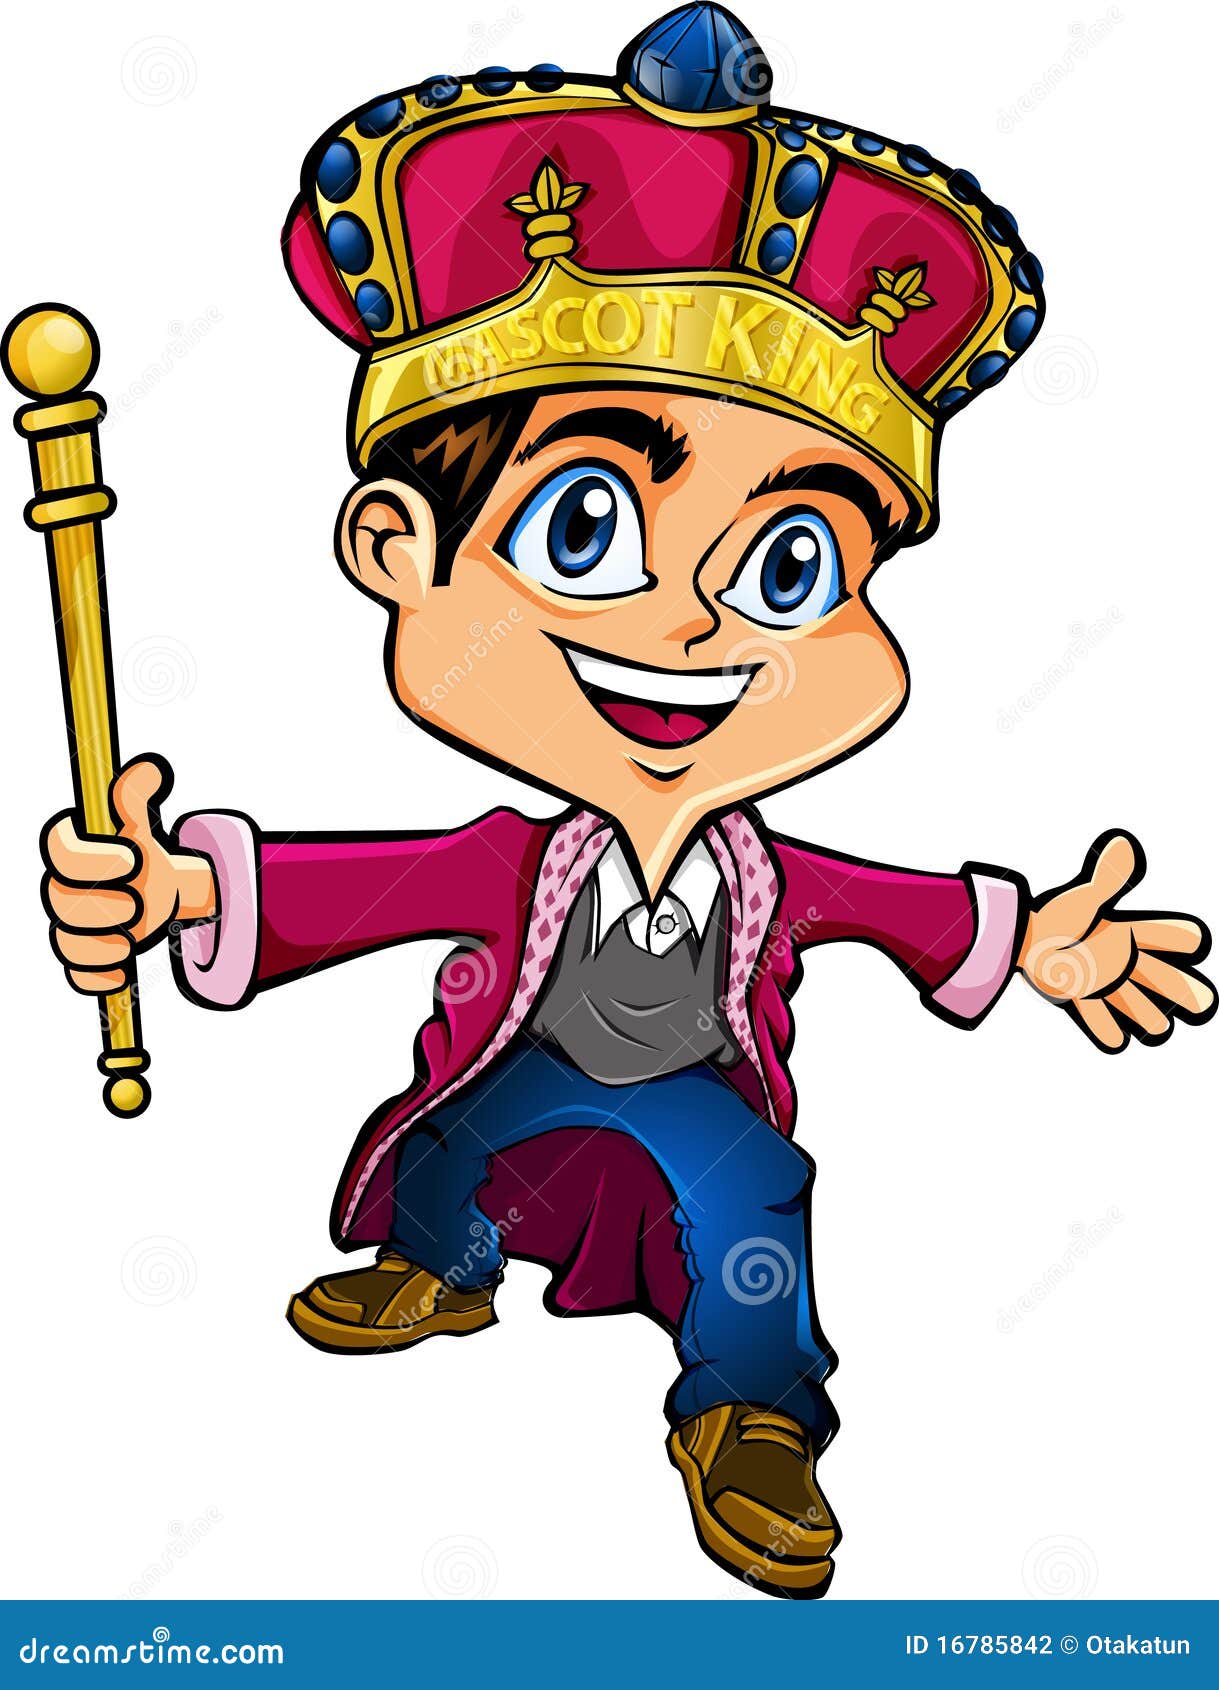 clipart mean king - photo #29